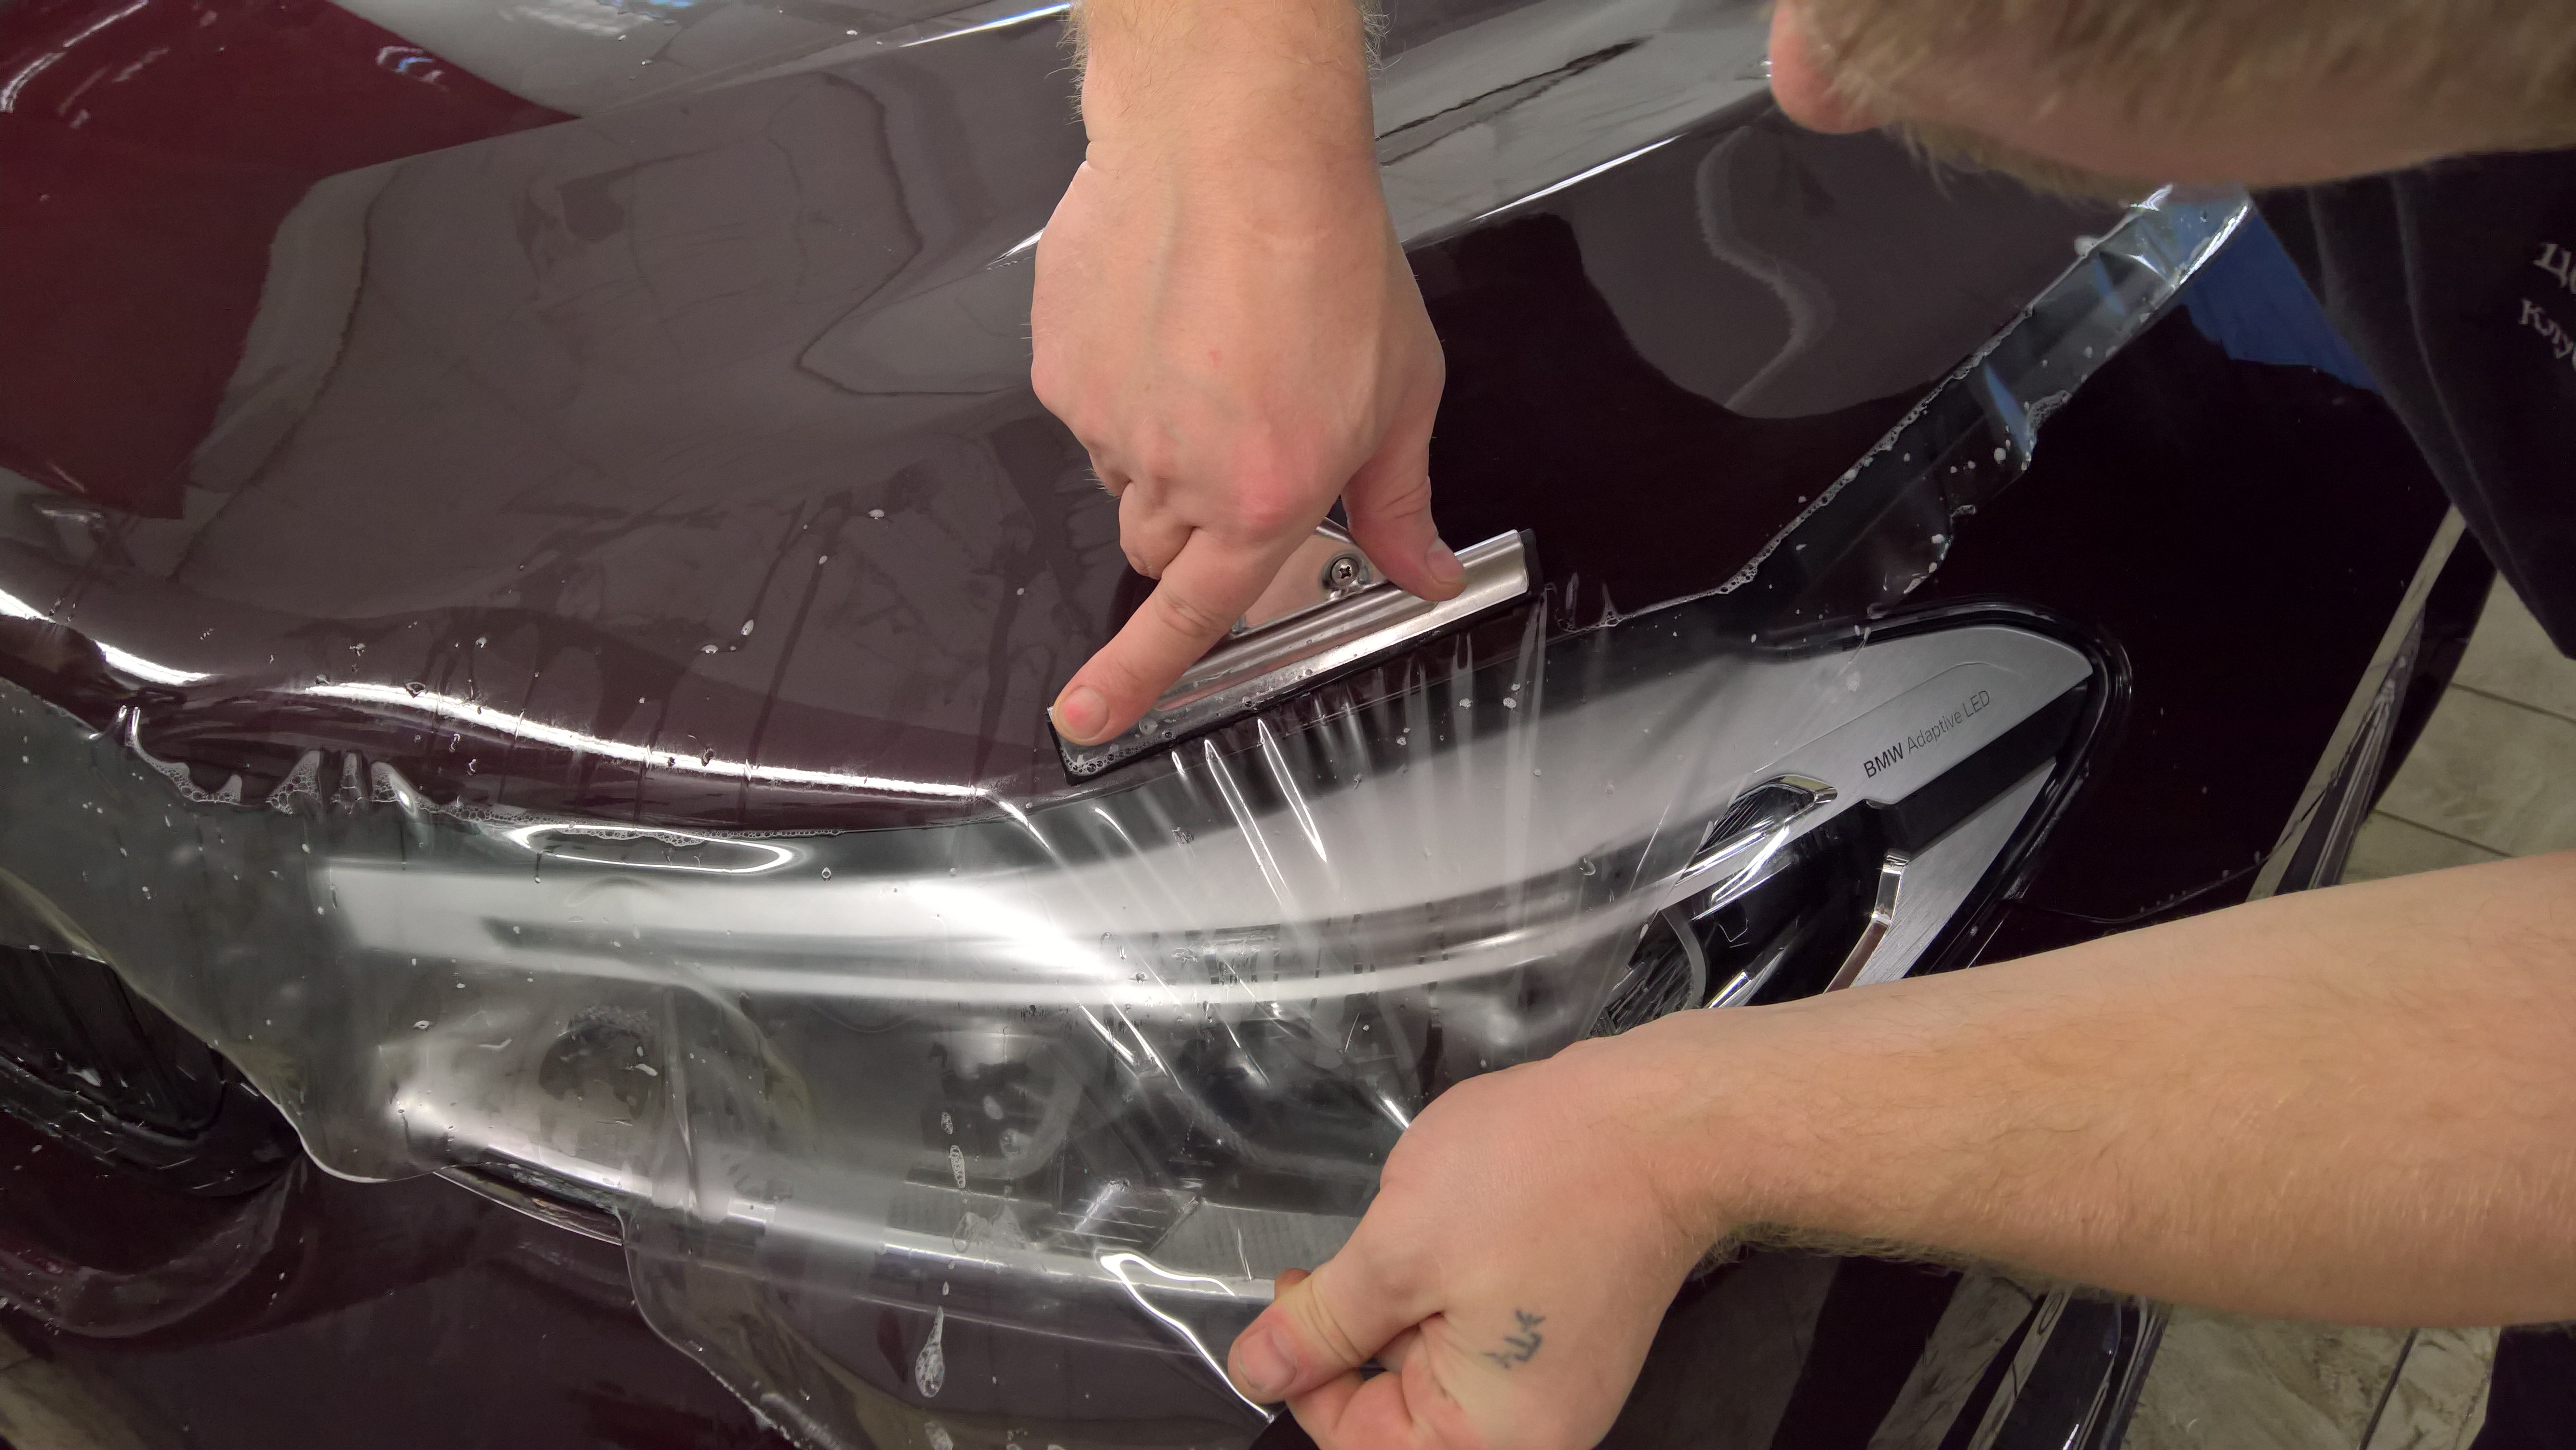 Can ceramic coating damage your car?